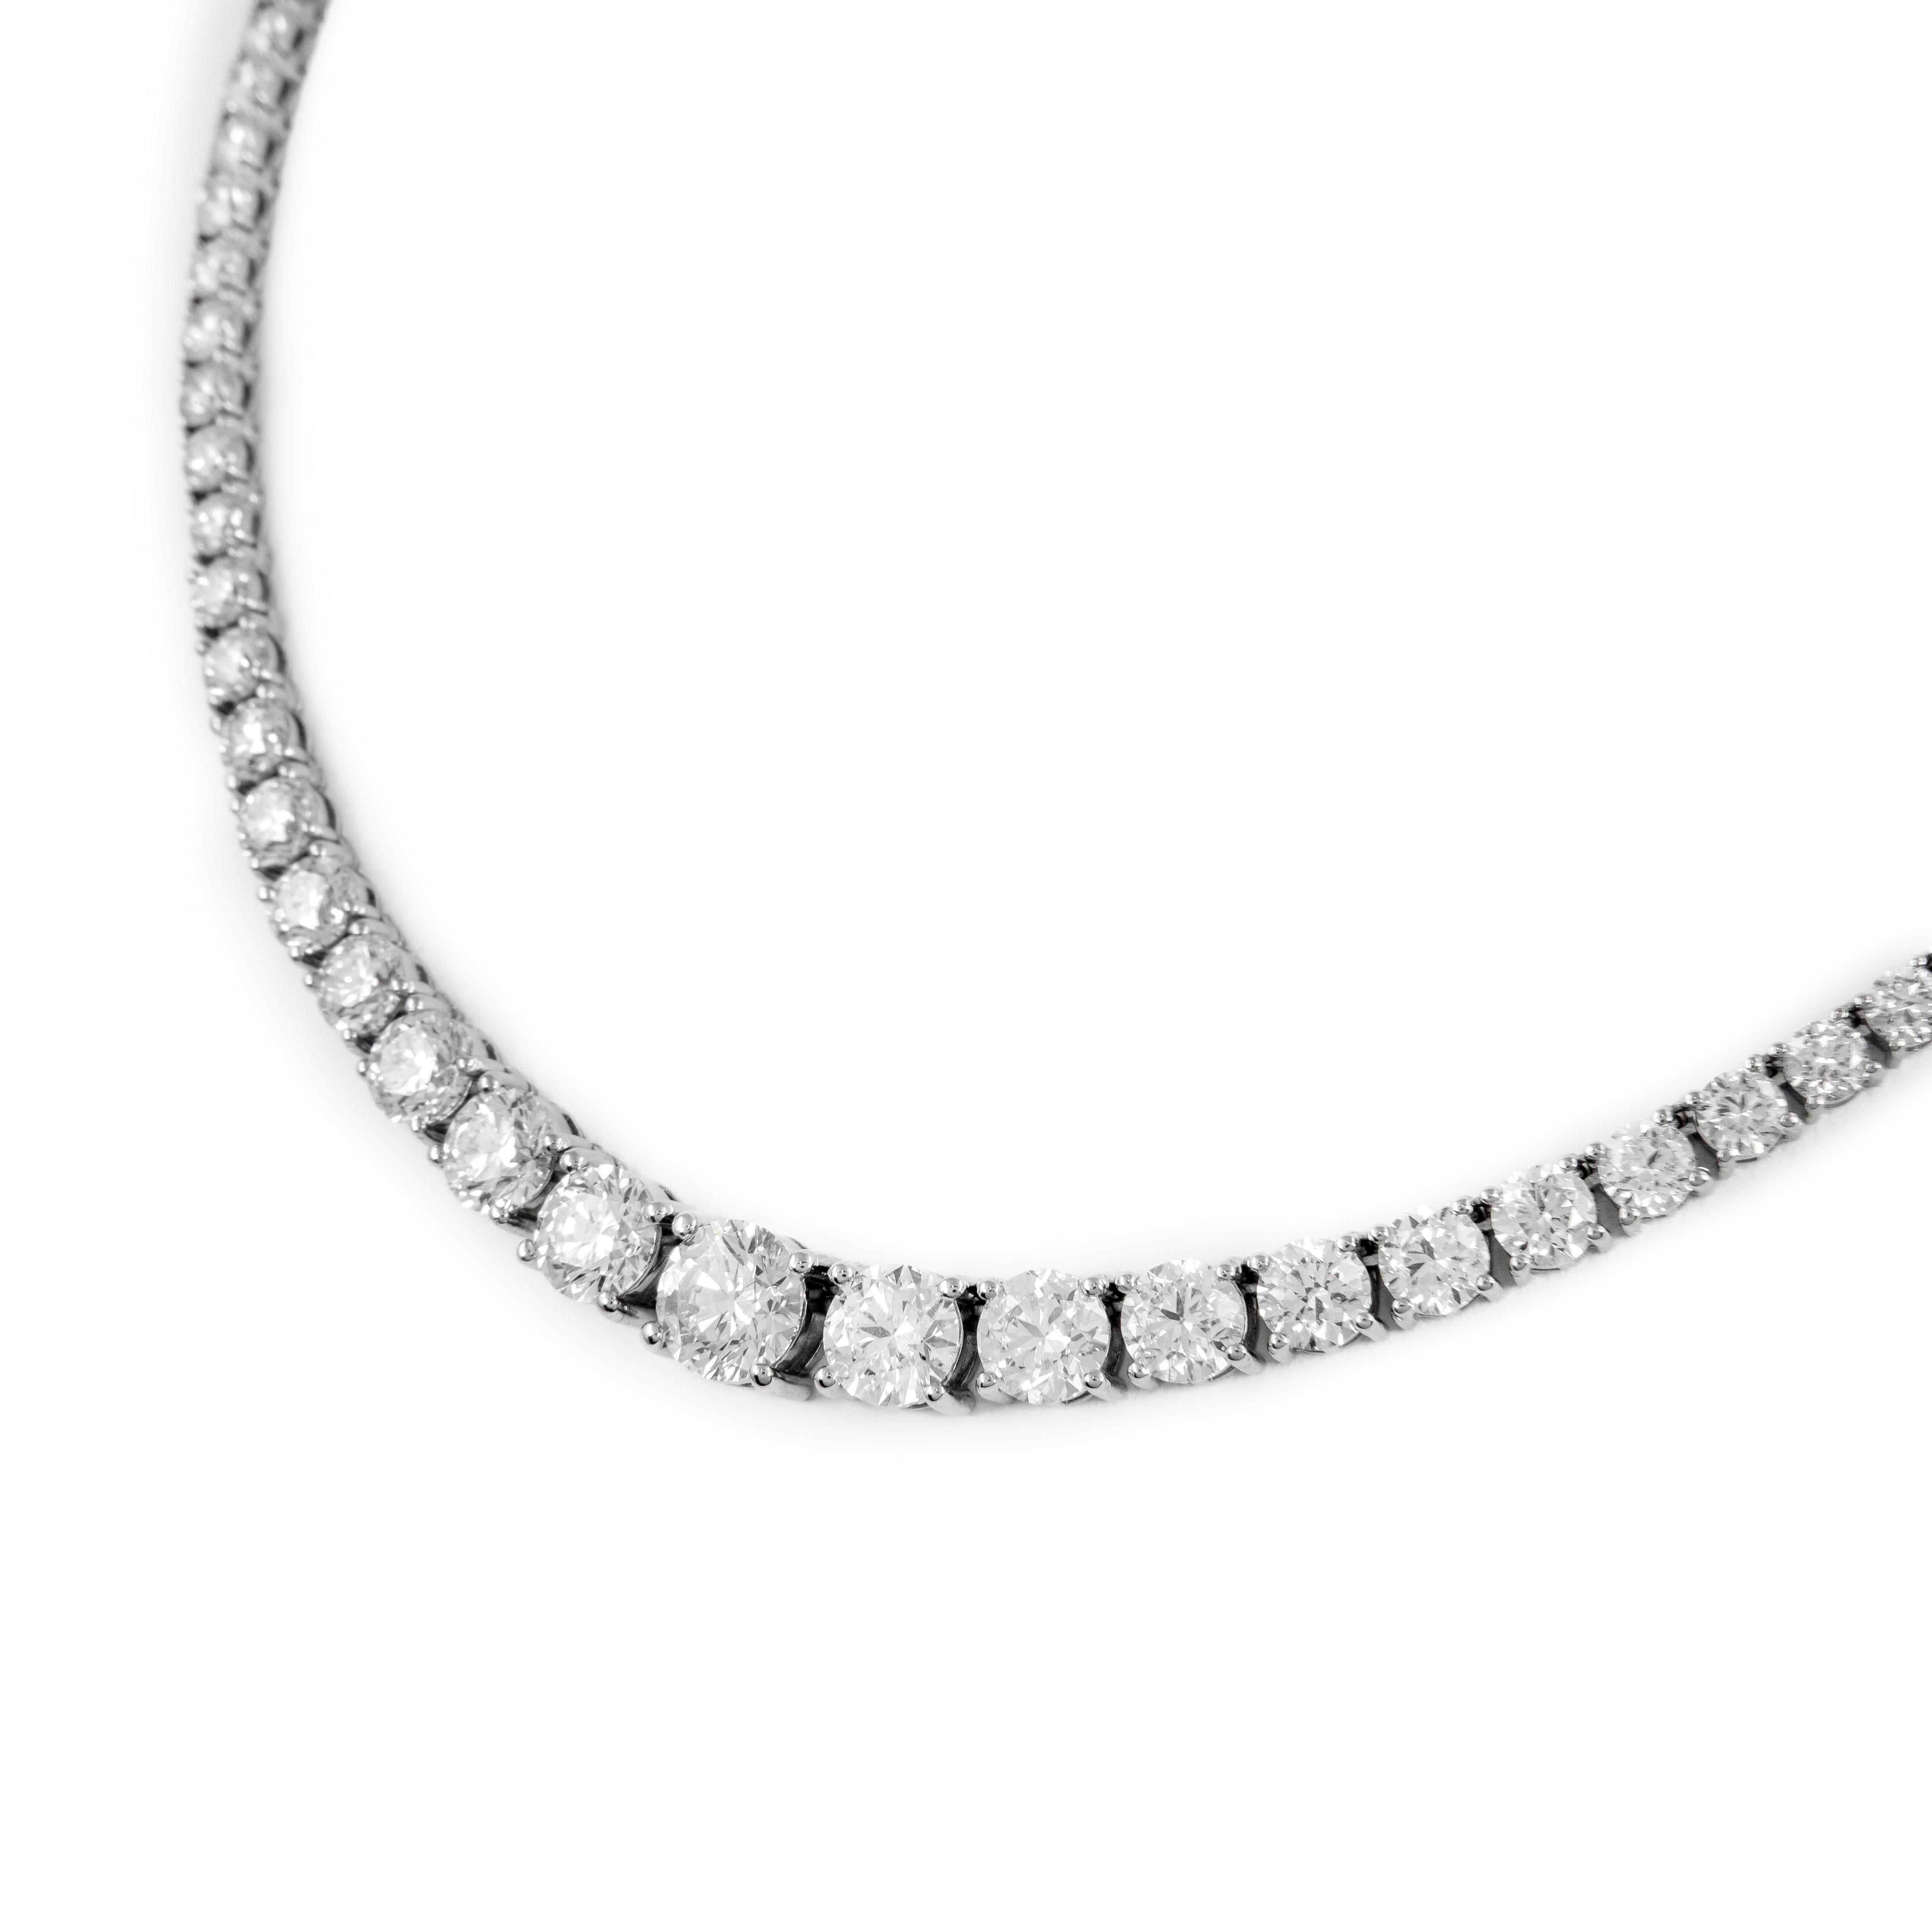 Beautiful and classic diamond tennis riviera necklace, GIA certified, by Alexander Beverly Hills.
99 round brilliant diamonds, 22.38 carats, 5 stones GIA certified. Approximately H-J color and VS1-SI2 clarity. 18k white gold, 30.56 grams,